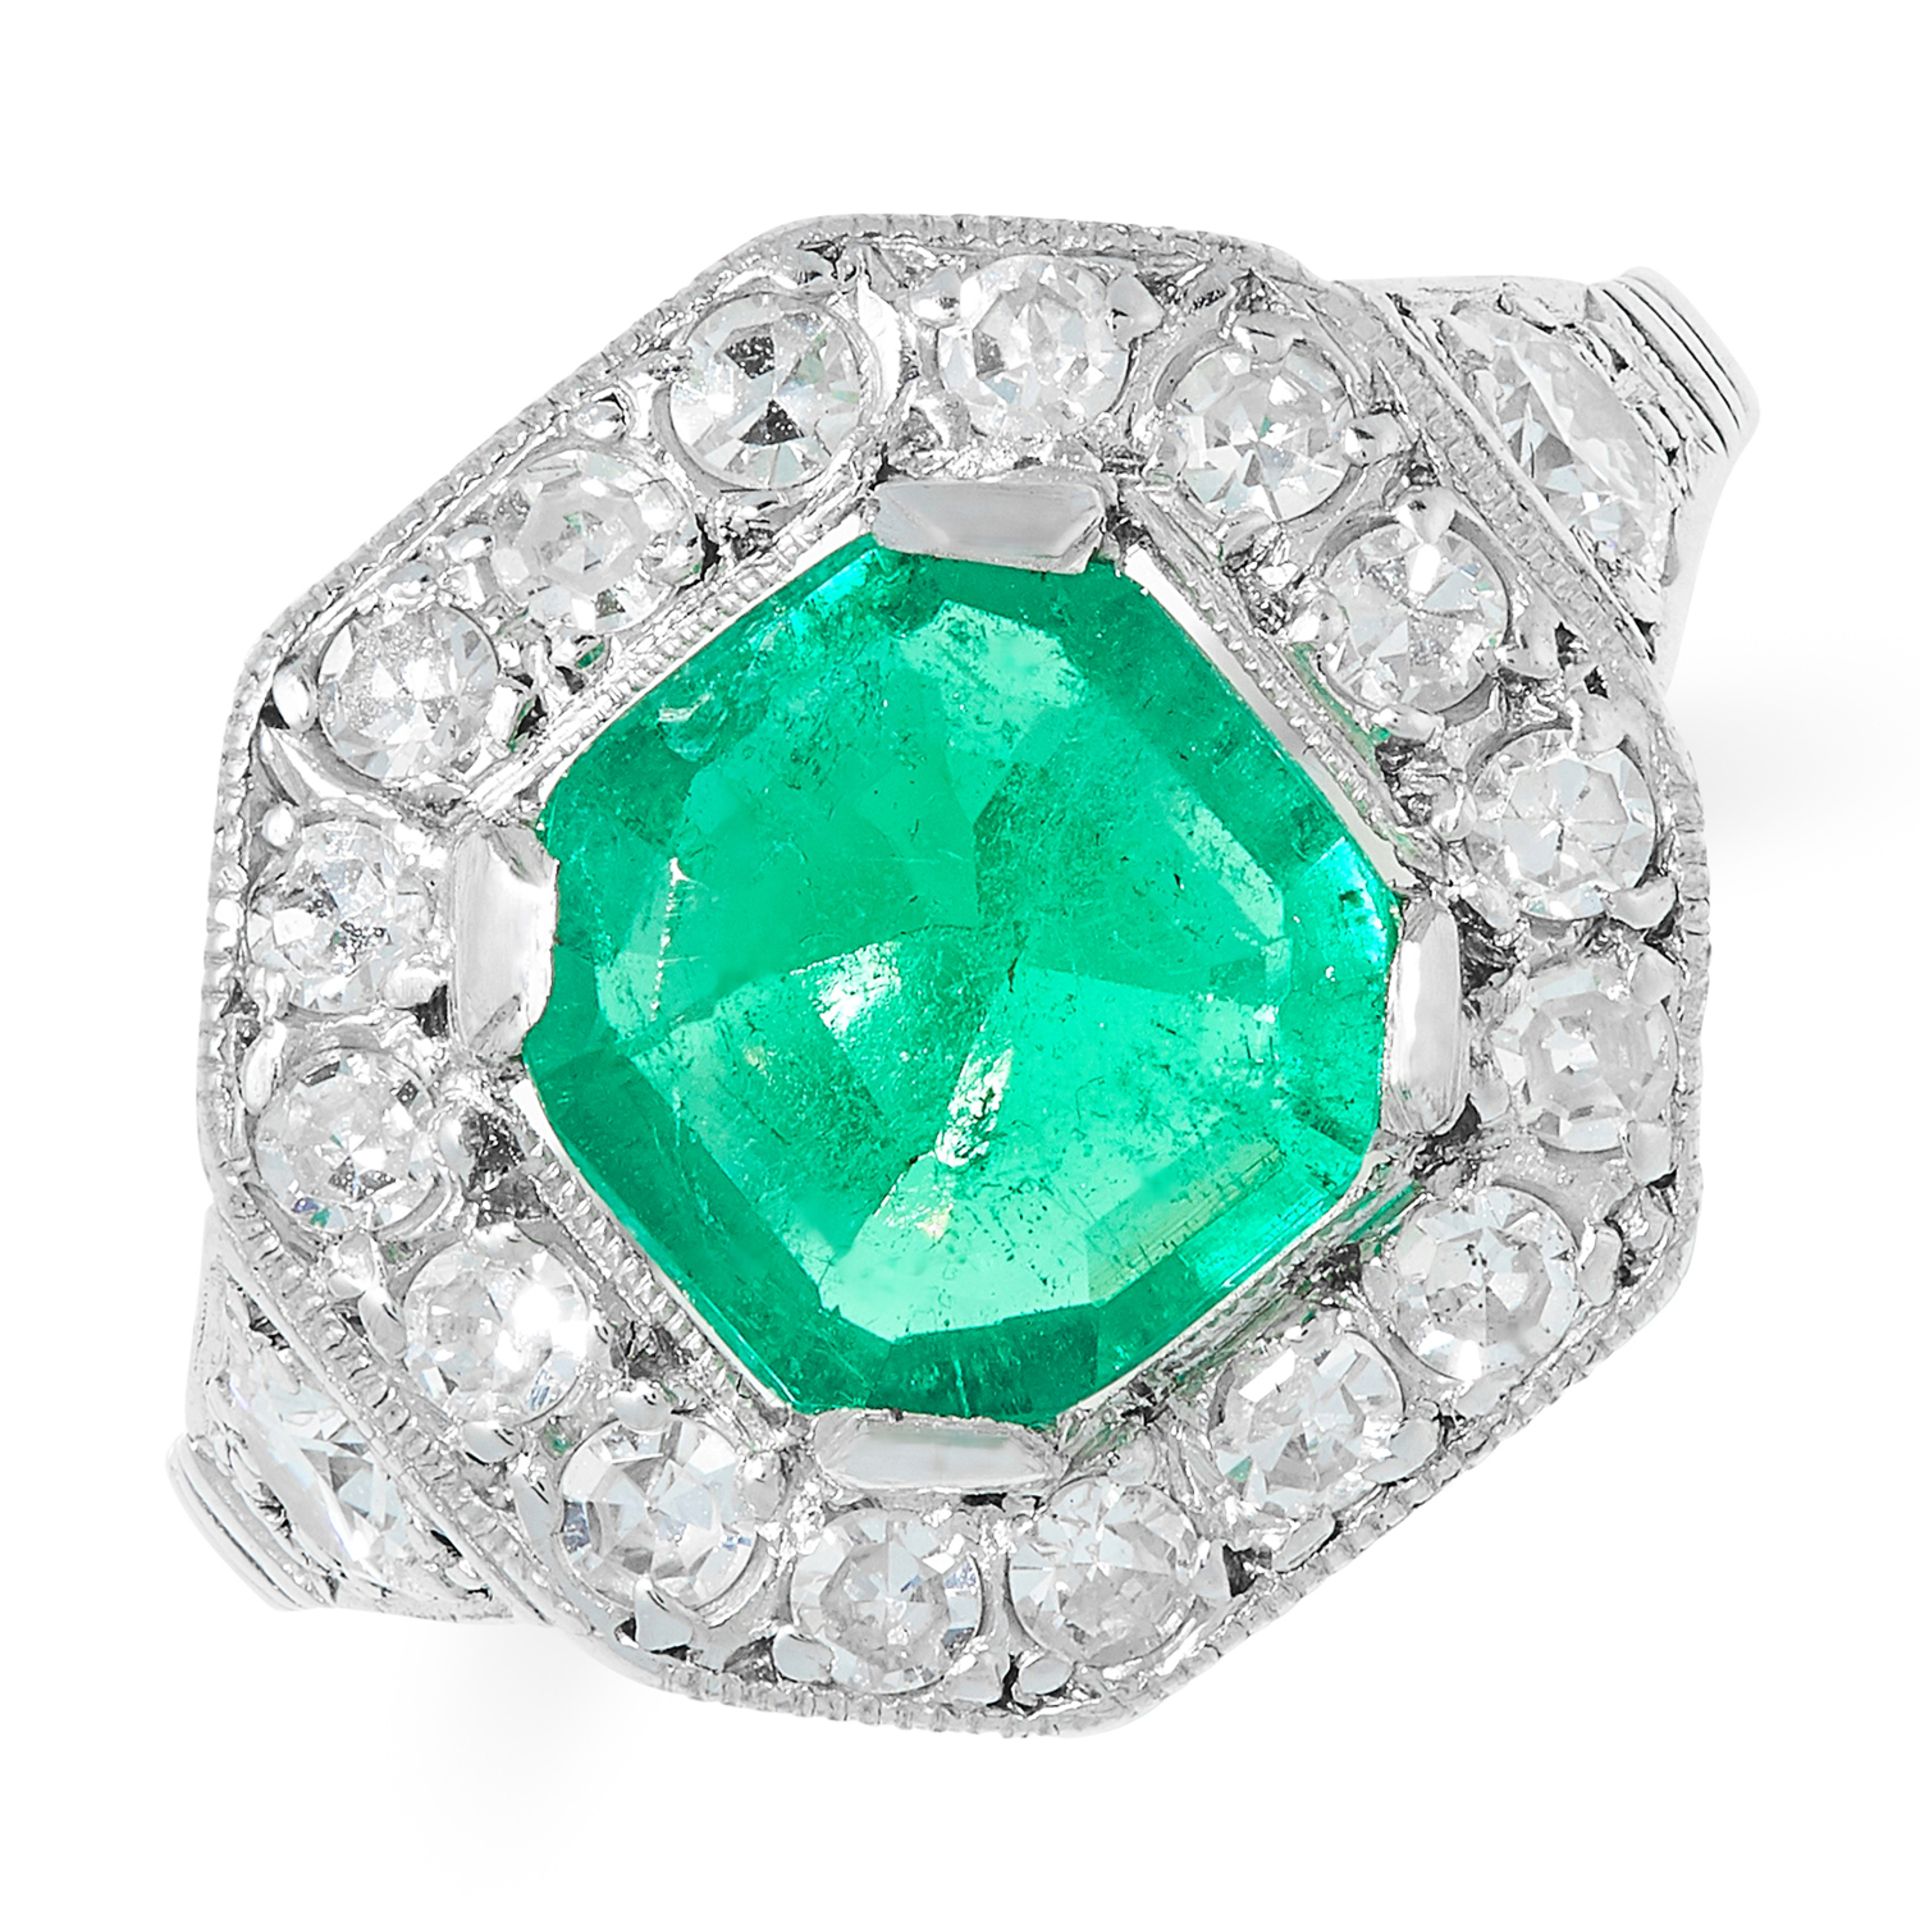 AN ART DECO COLOMBIAN EMERALD AND DIAMOND RING set with an emerald cut emerald of 1.42 carats within